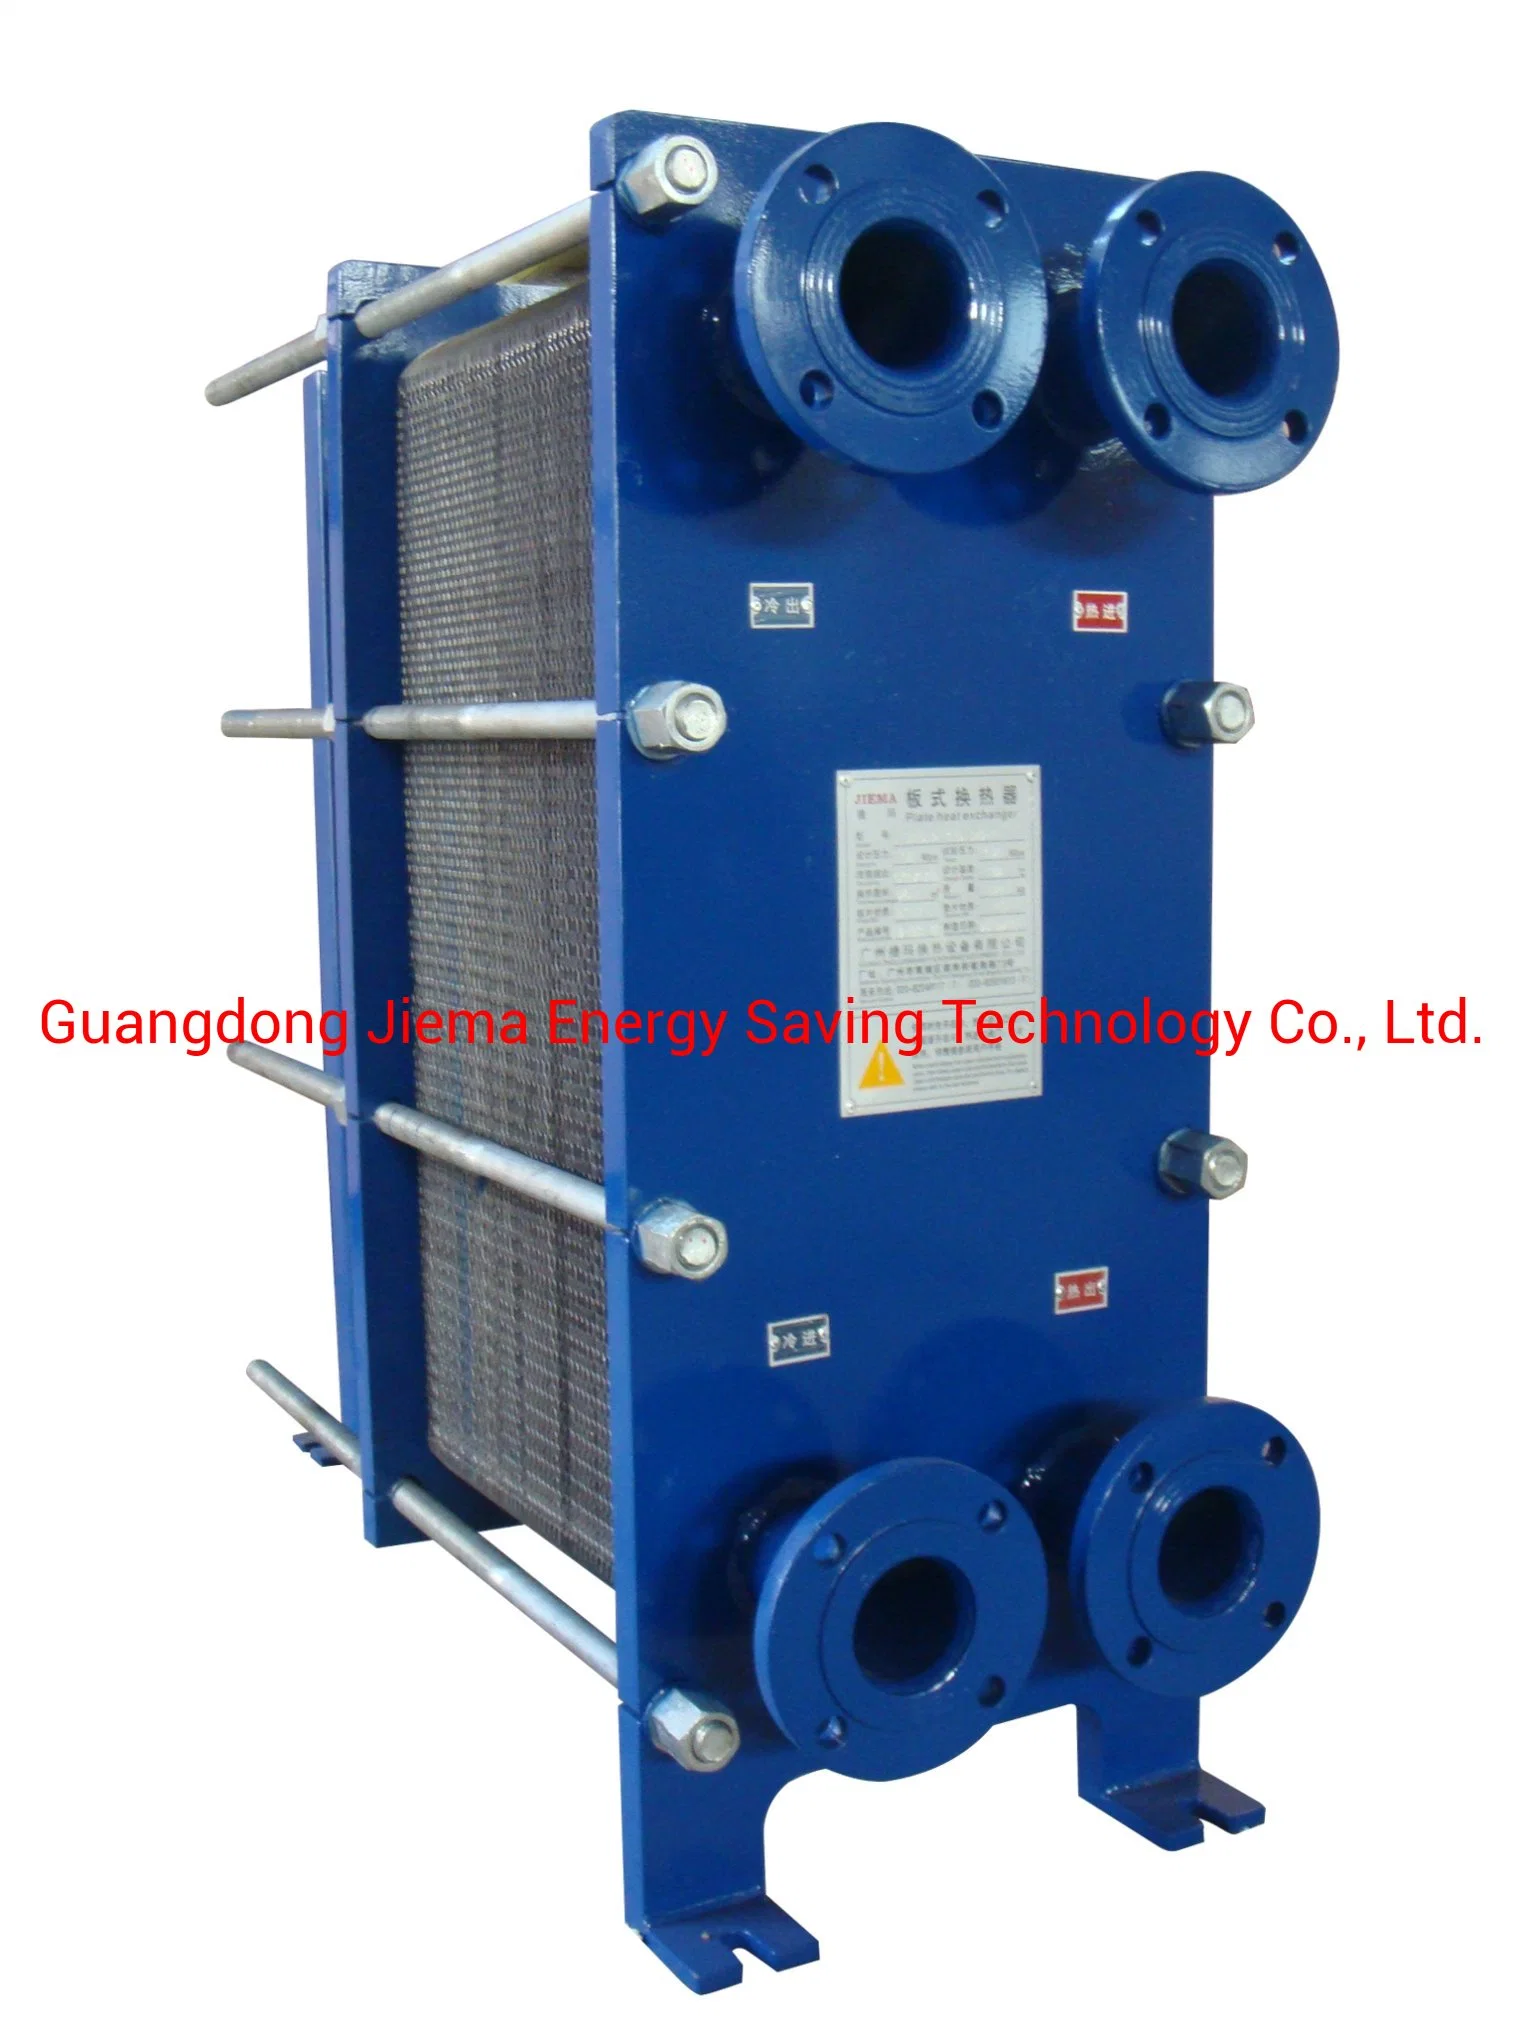 Plate Heat Exchanger for Textile Industrial Cooling or Heating